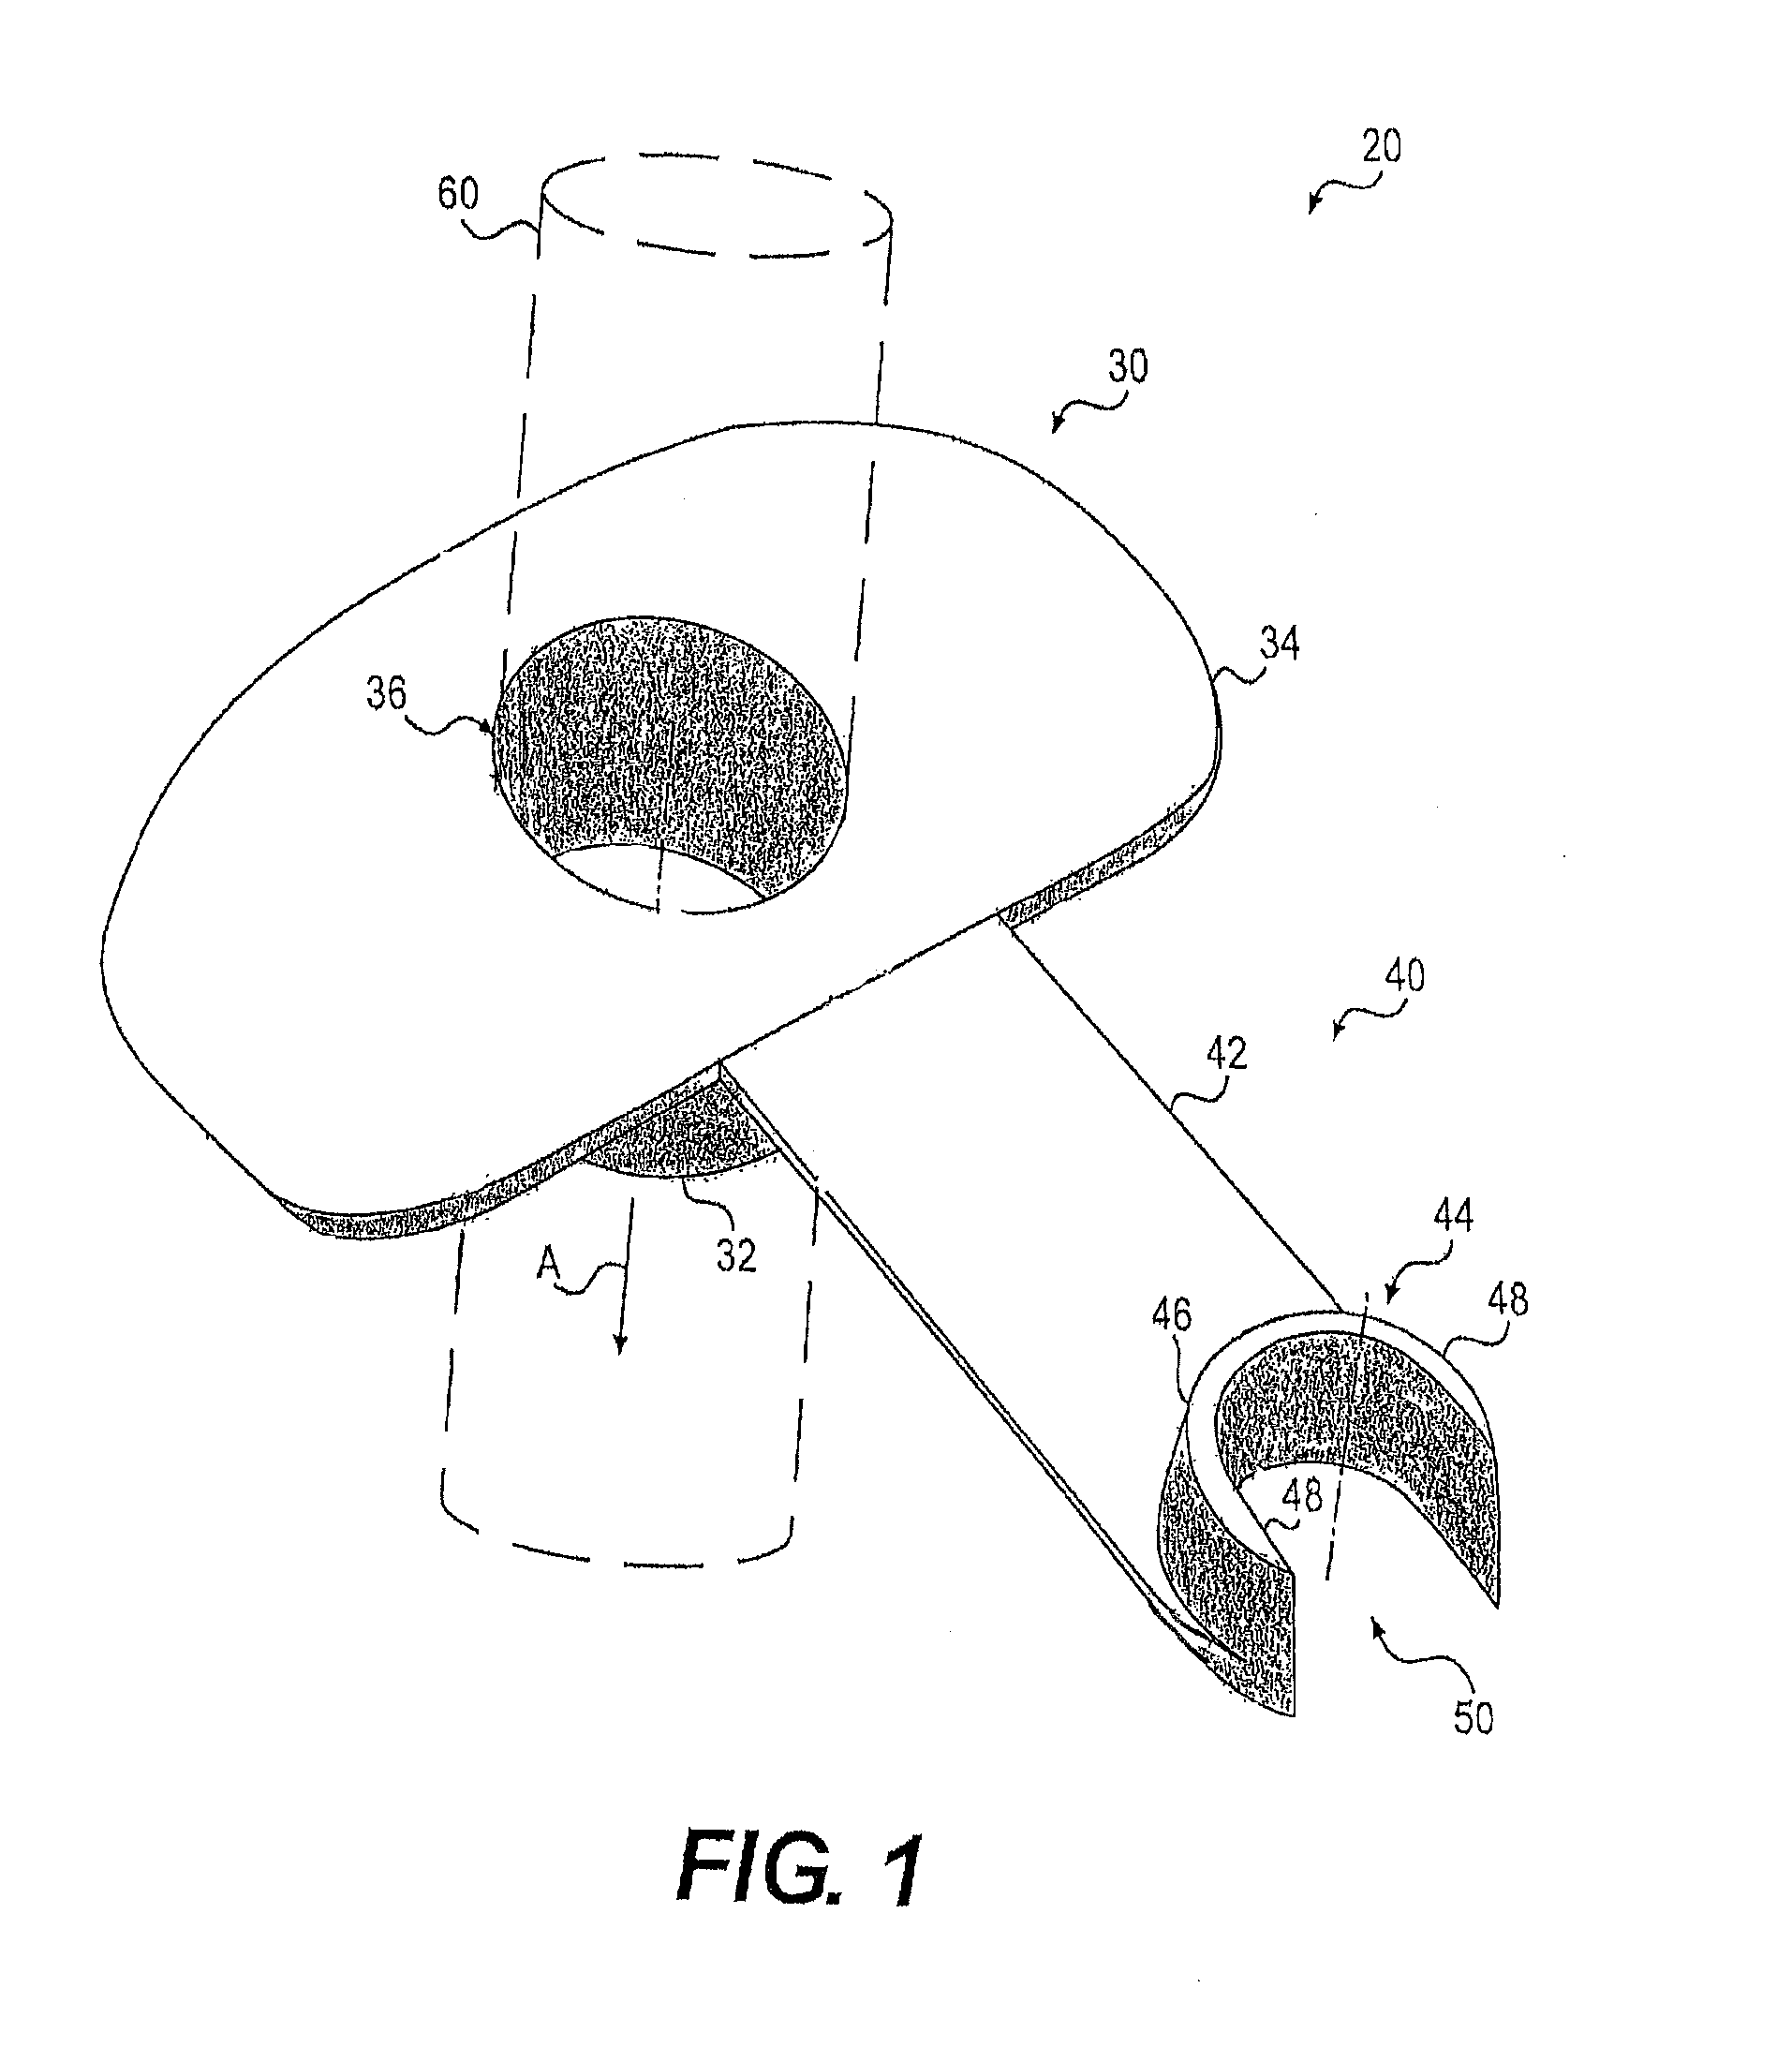 Endoscopic bite guard and related methods of use